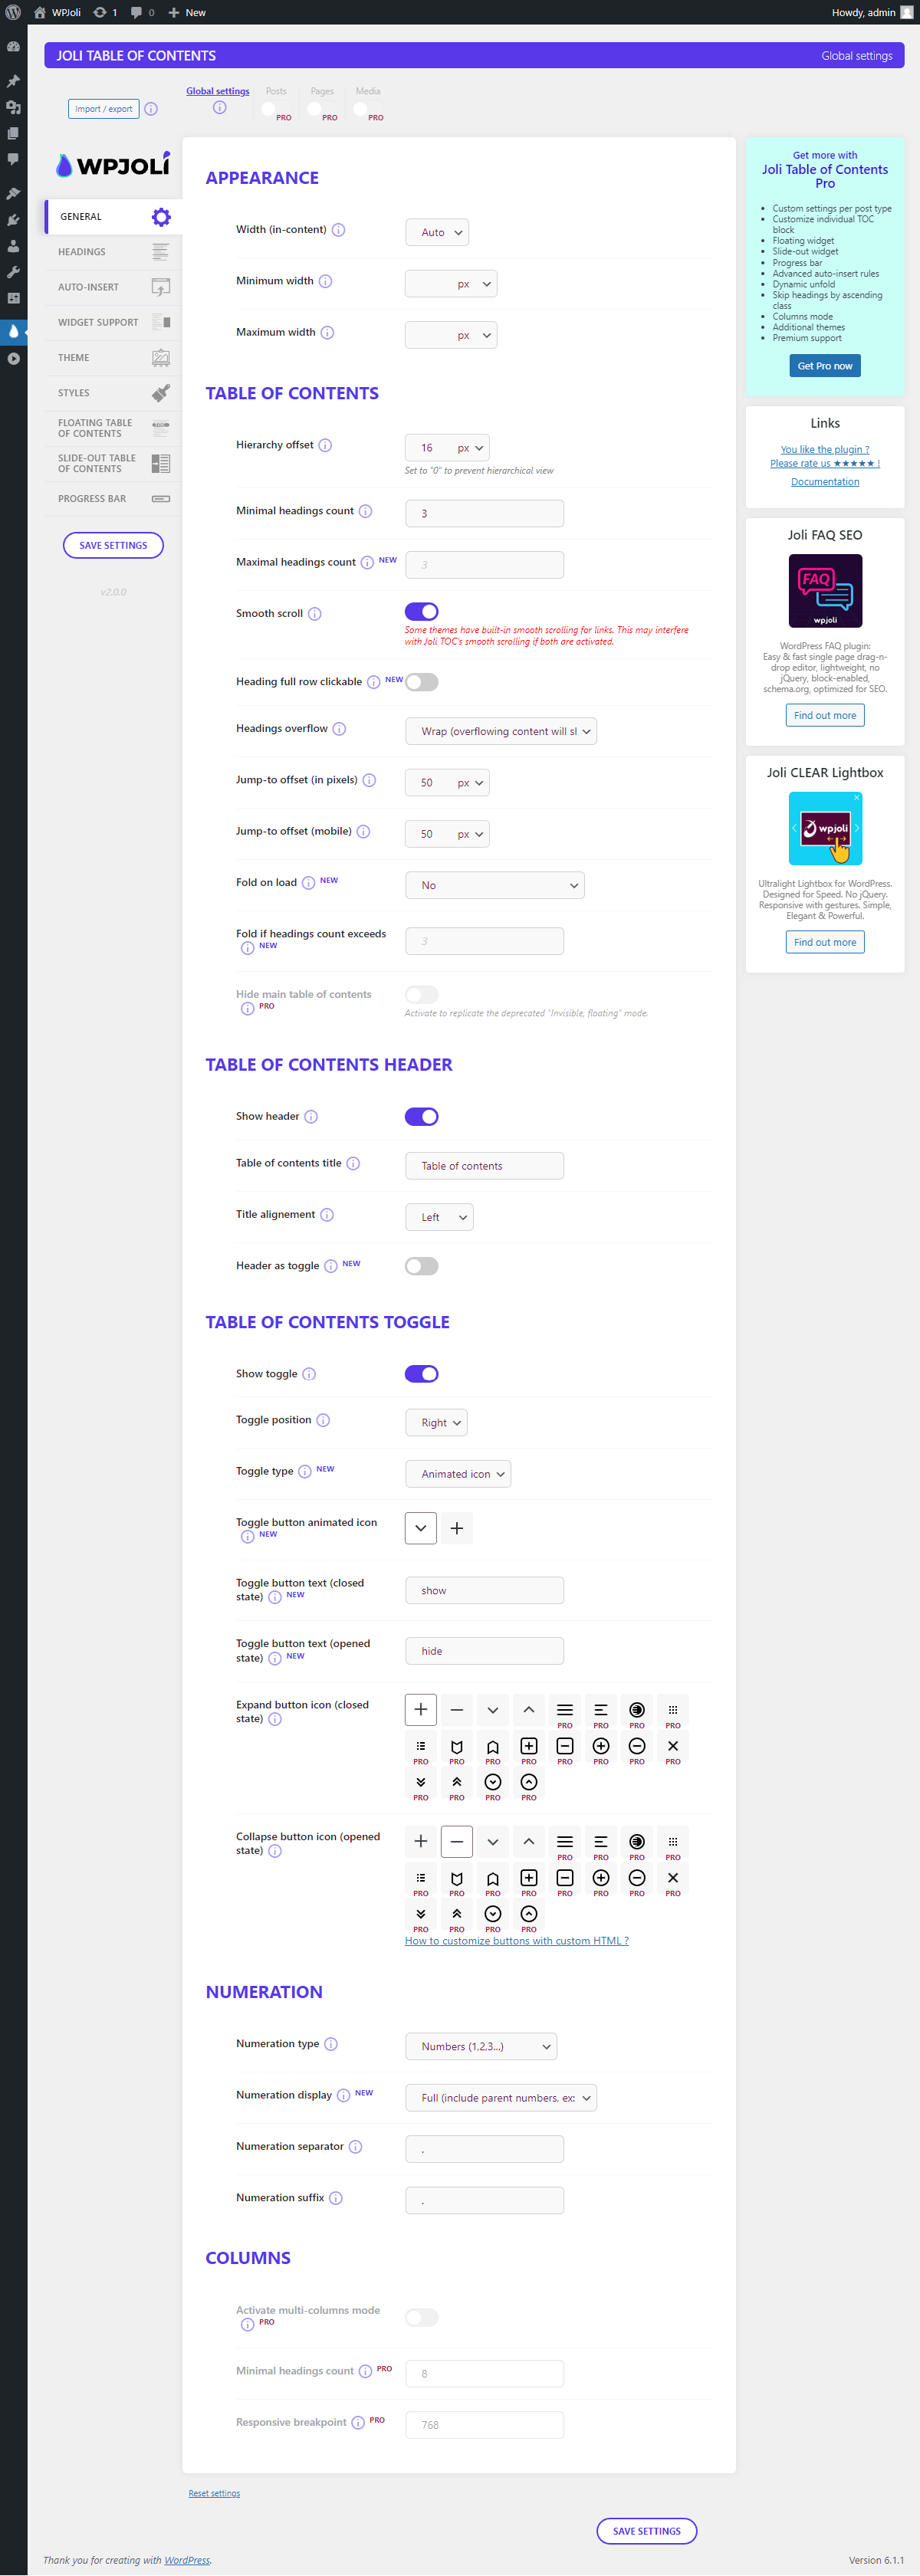 Settings page - STYLES